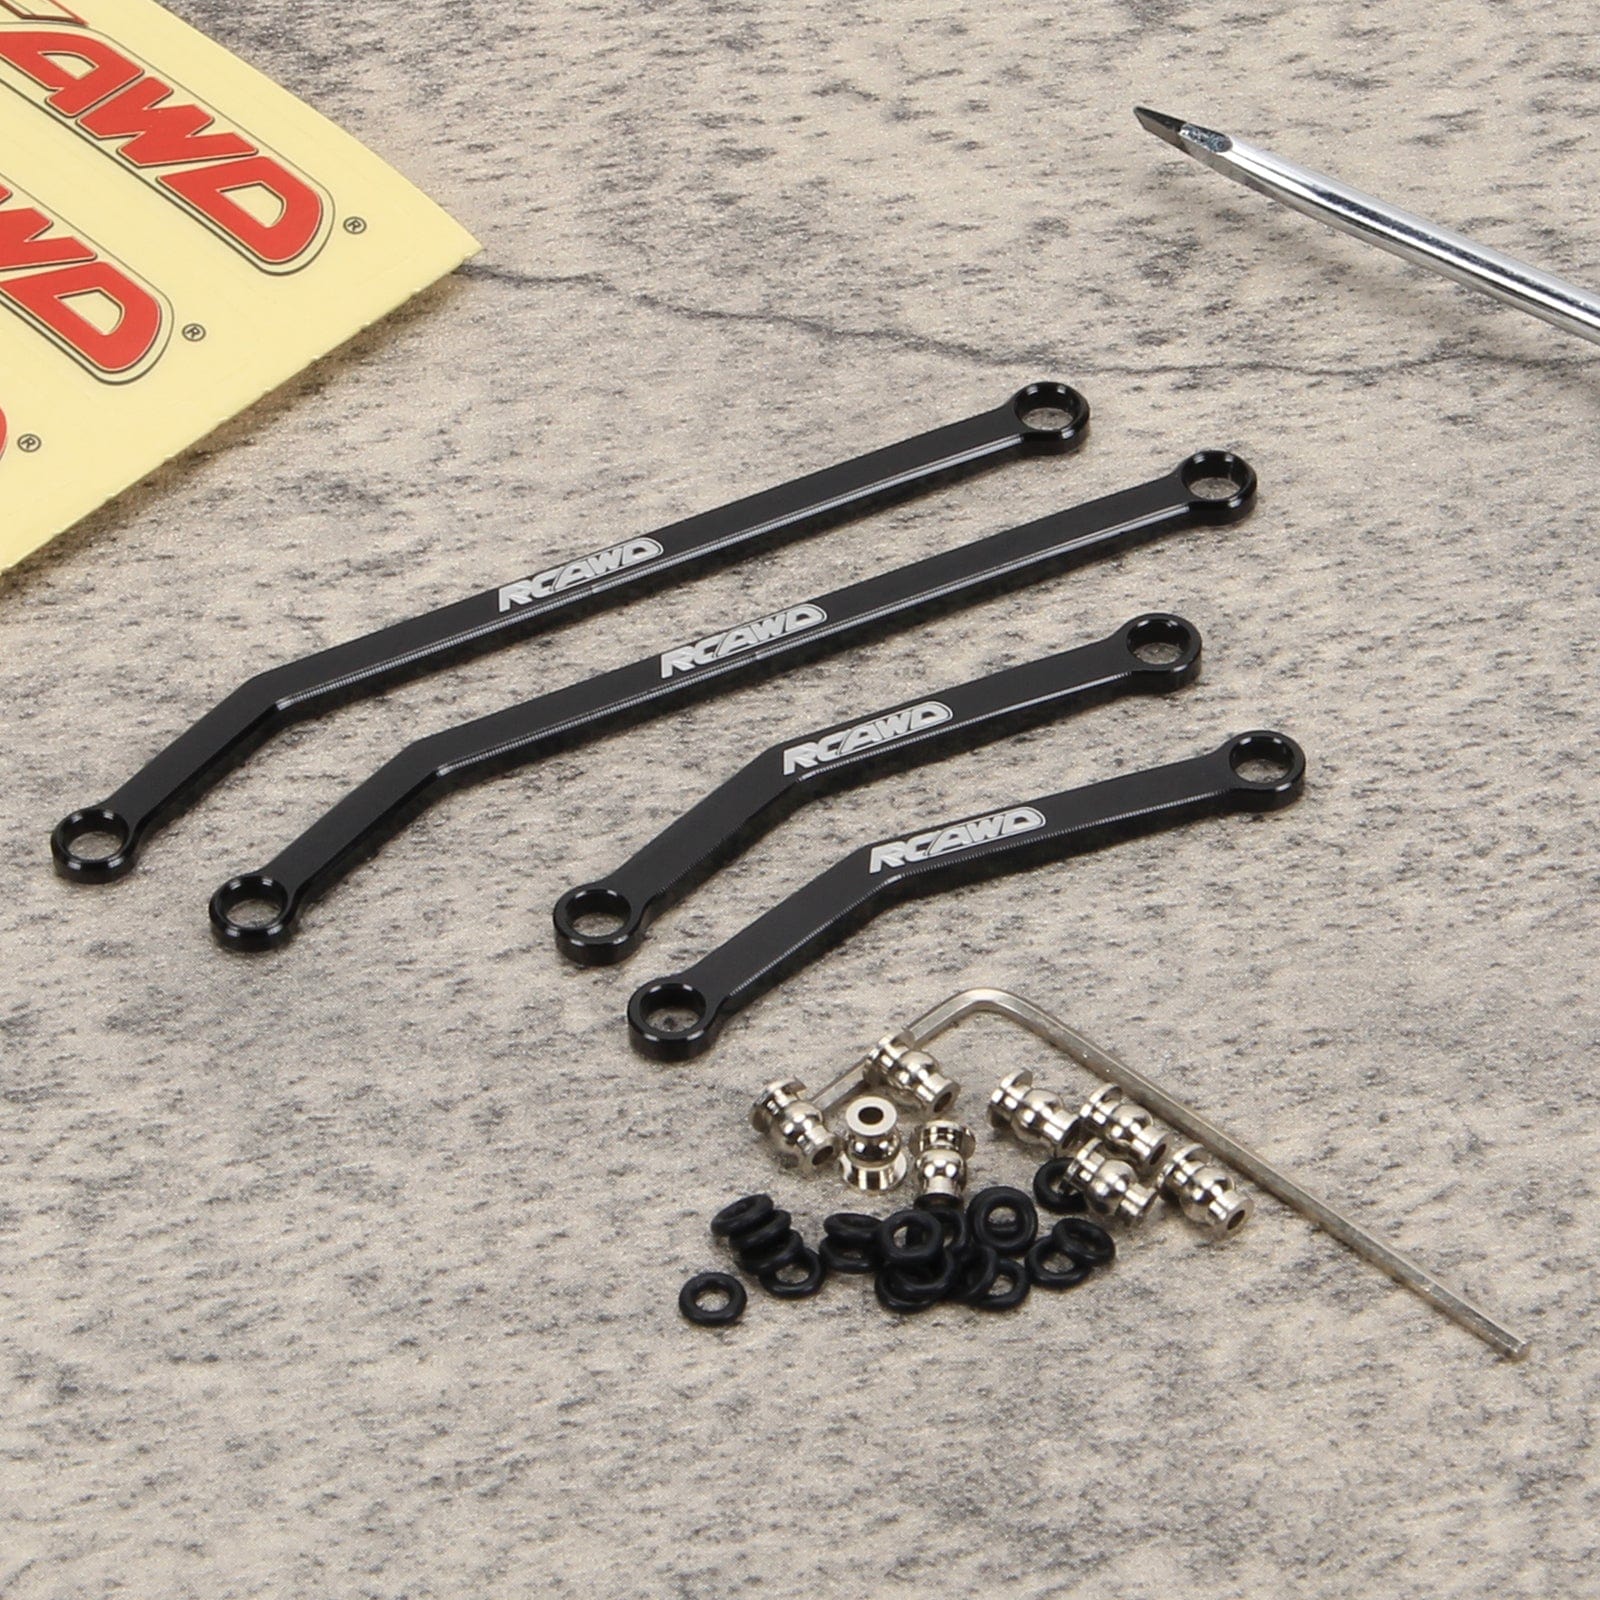 RCAWD Black RCAWD 1/24 Axial SCX24 Upgrades Aluminum alloy 41mm 69mm lower linkage toe link tie rod set SCX2542